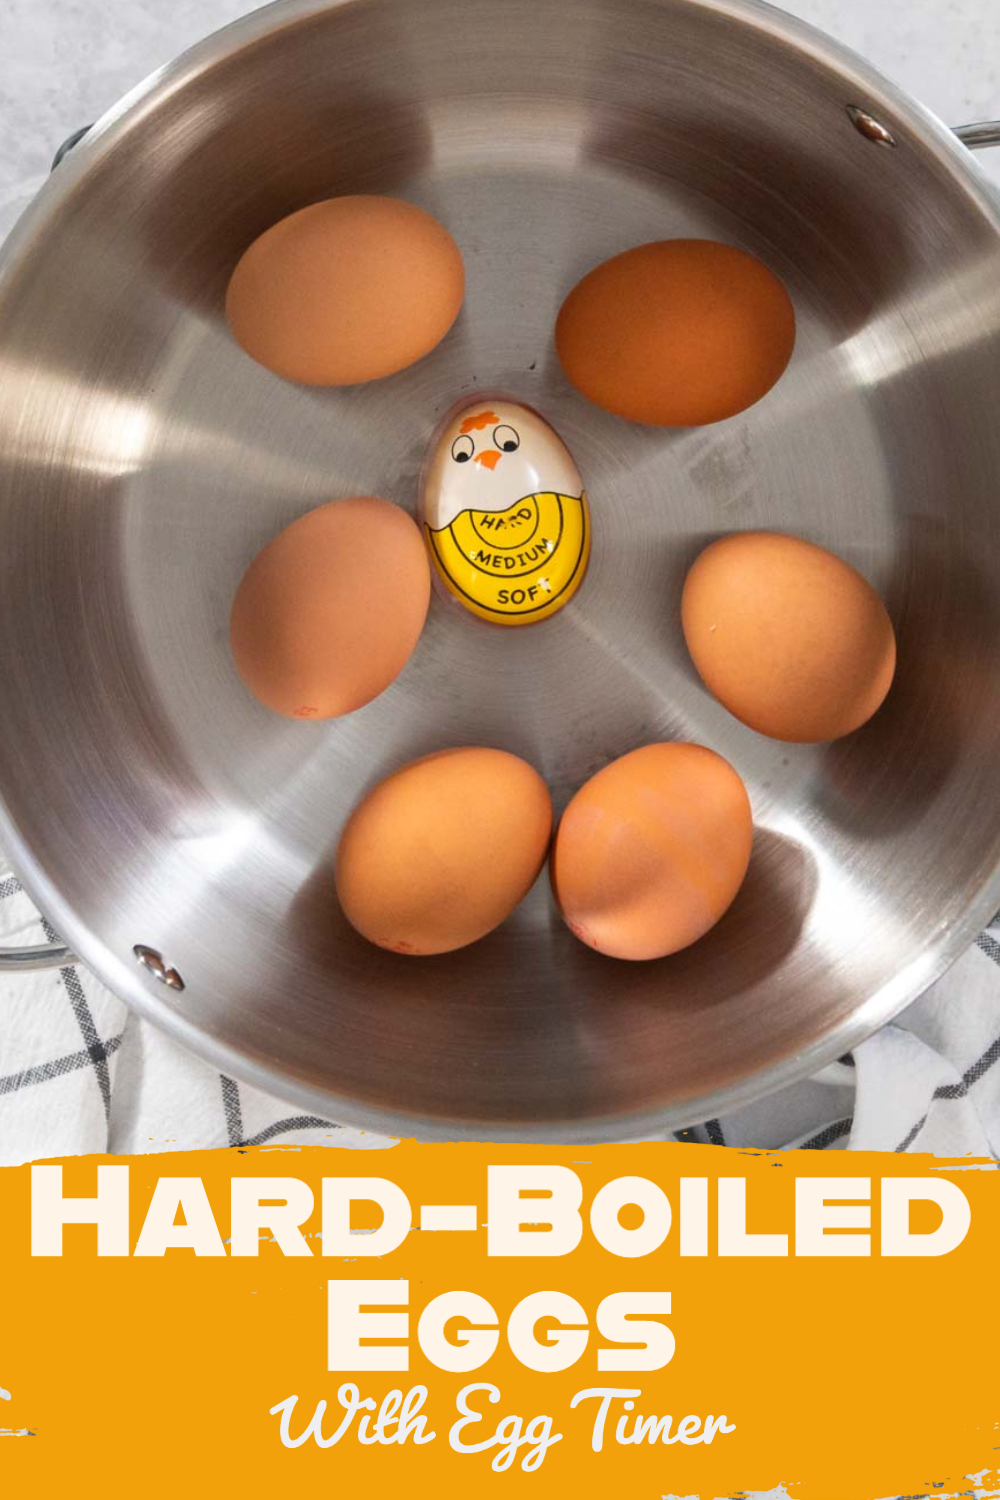 How to Boil Eggs With Egg Timer